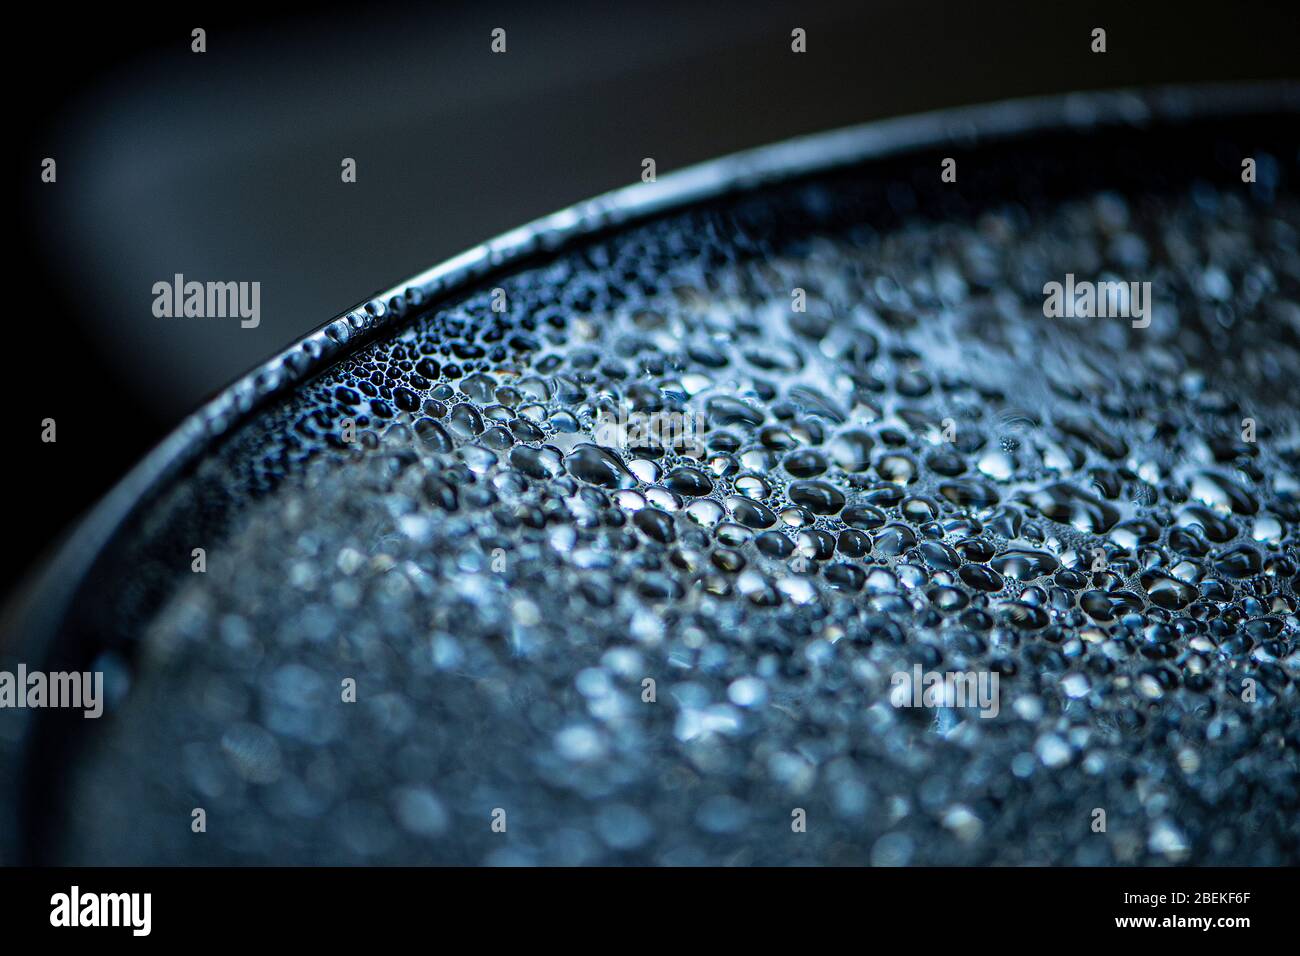 condensation droplets on a glass lid Stock Photo